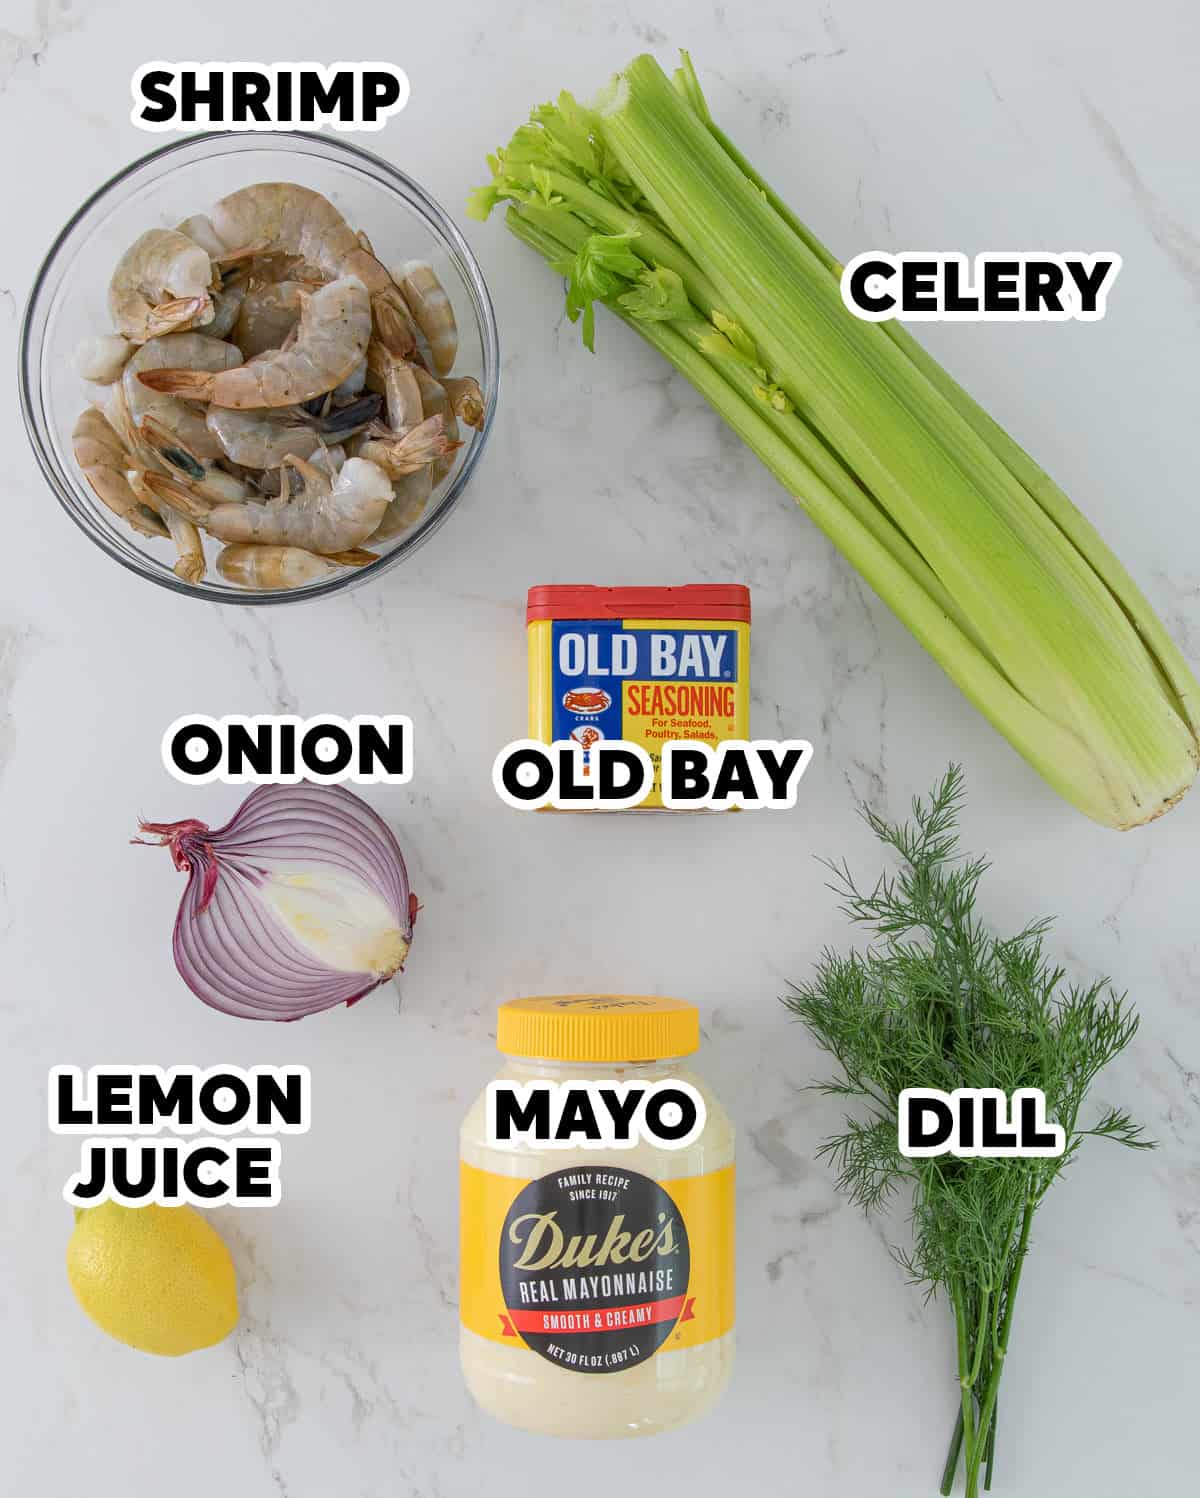 Overhead view of ingredients for shrimp salad with overlay text.